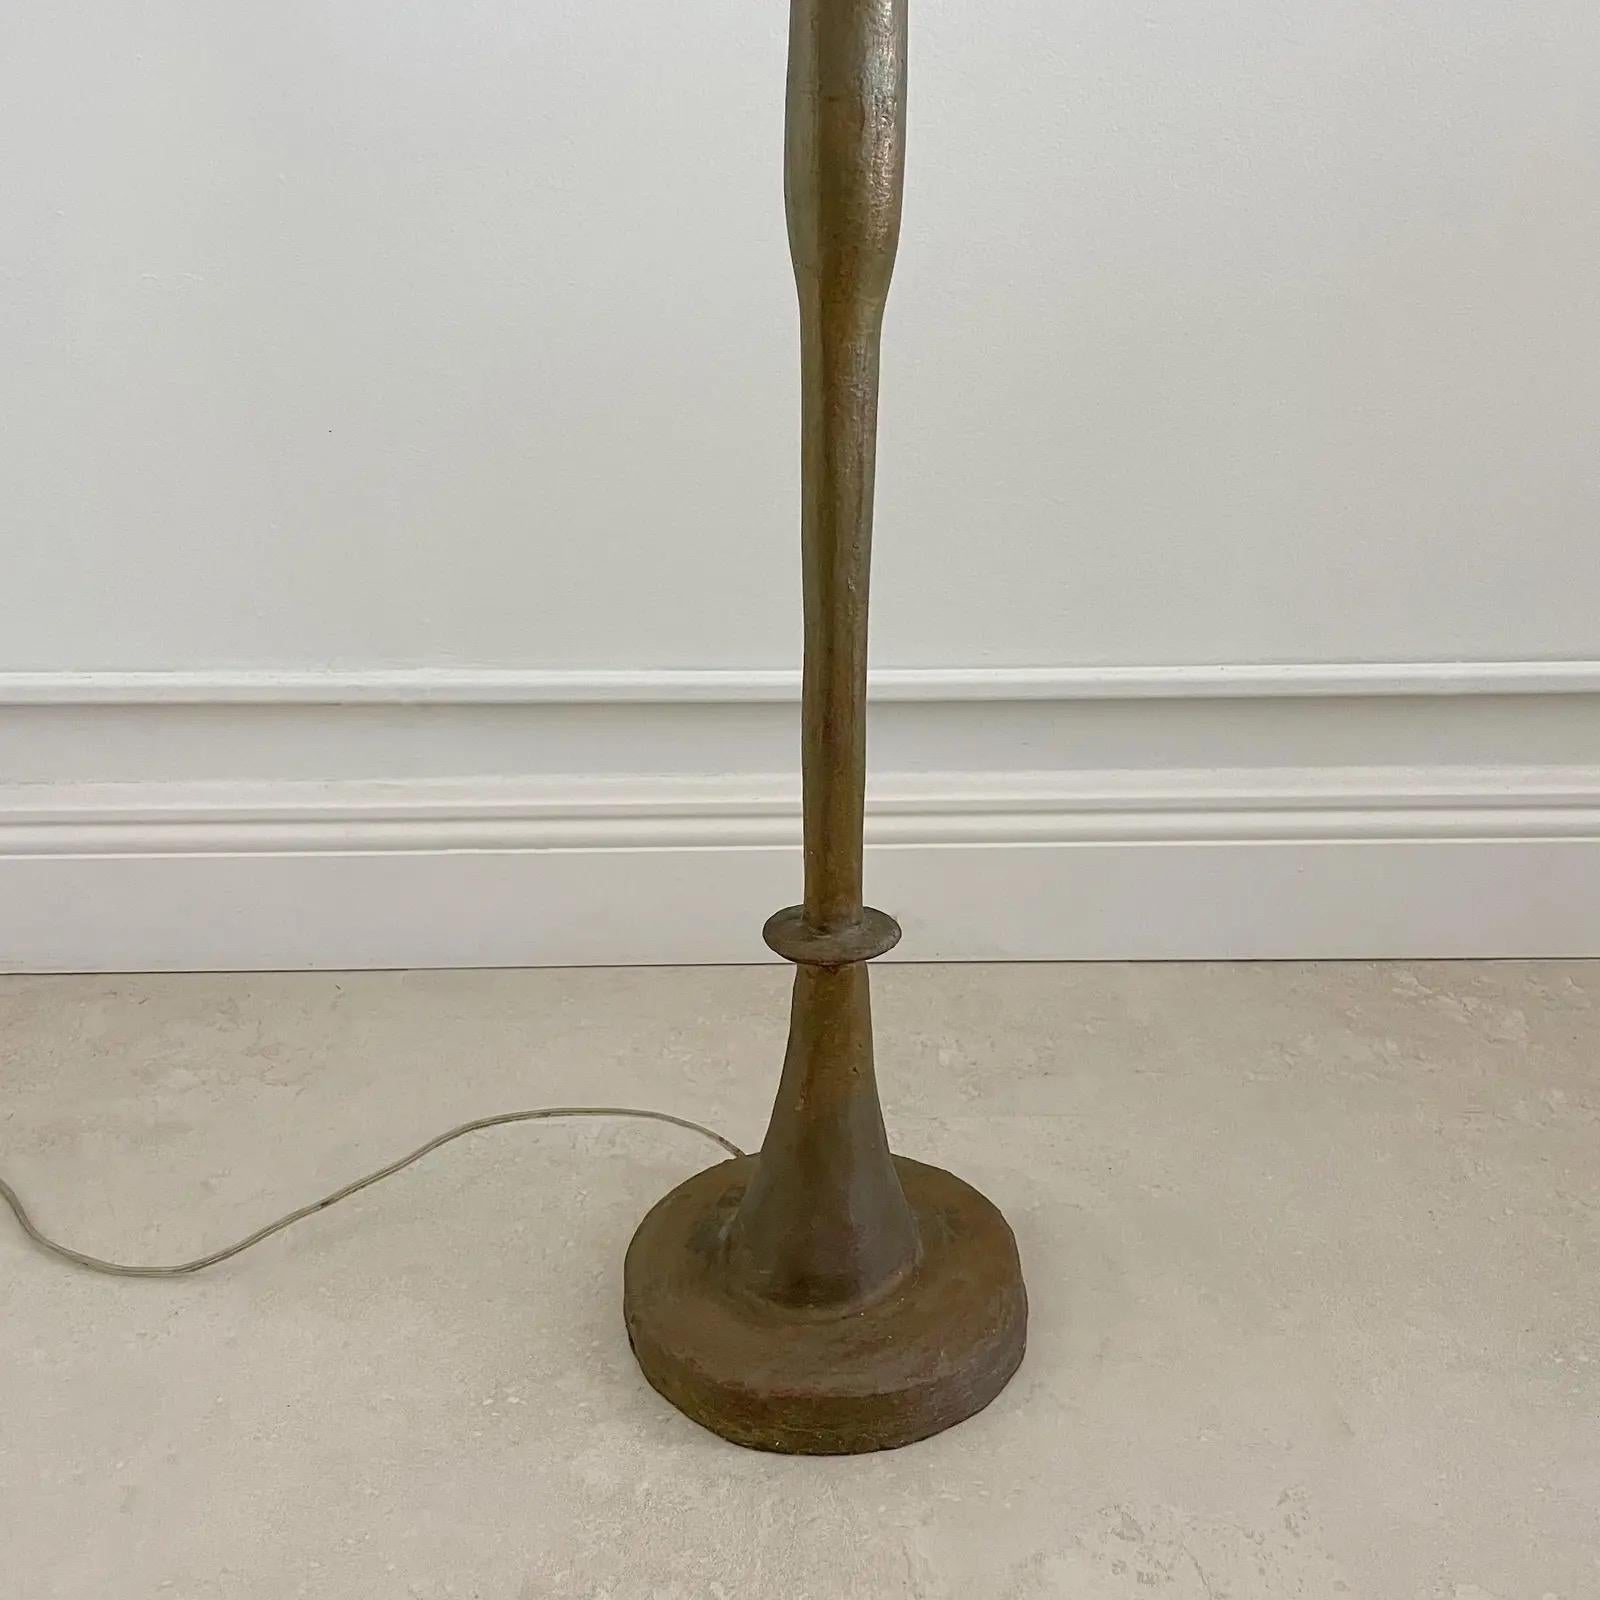 Painted Vintage Giacometti Style Floor Lamp with Bronze Finish